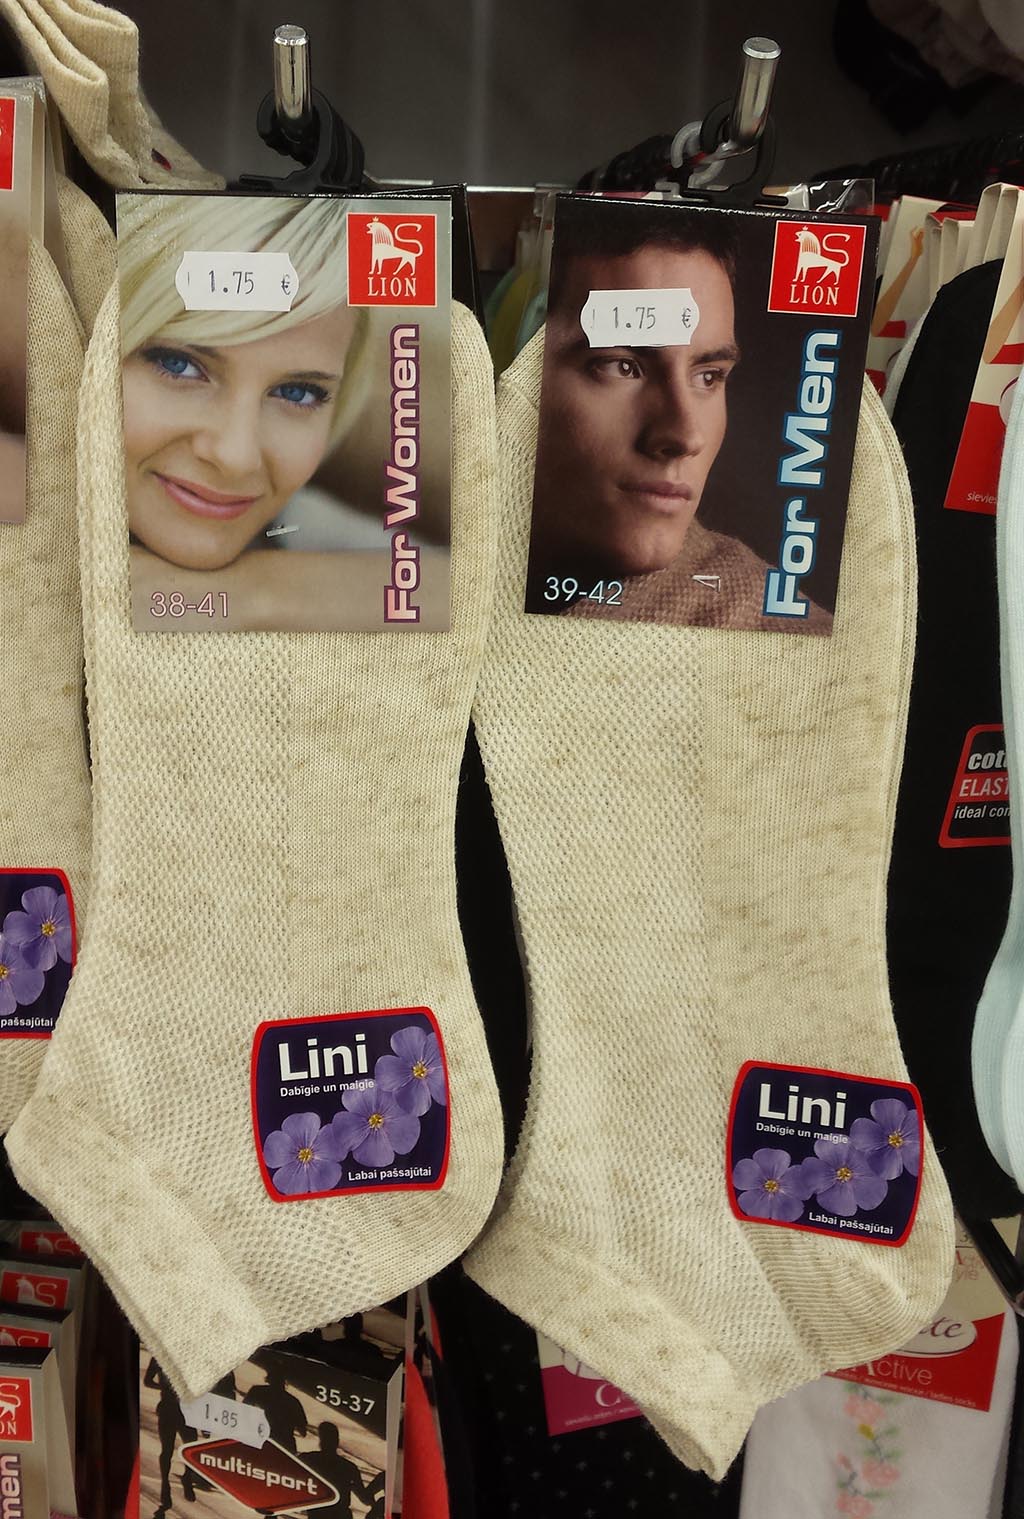 Identical socks, different packaging.